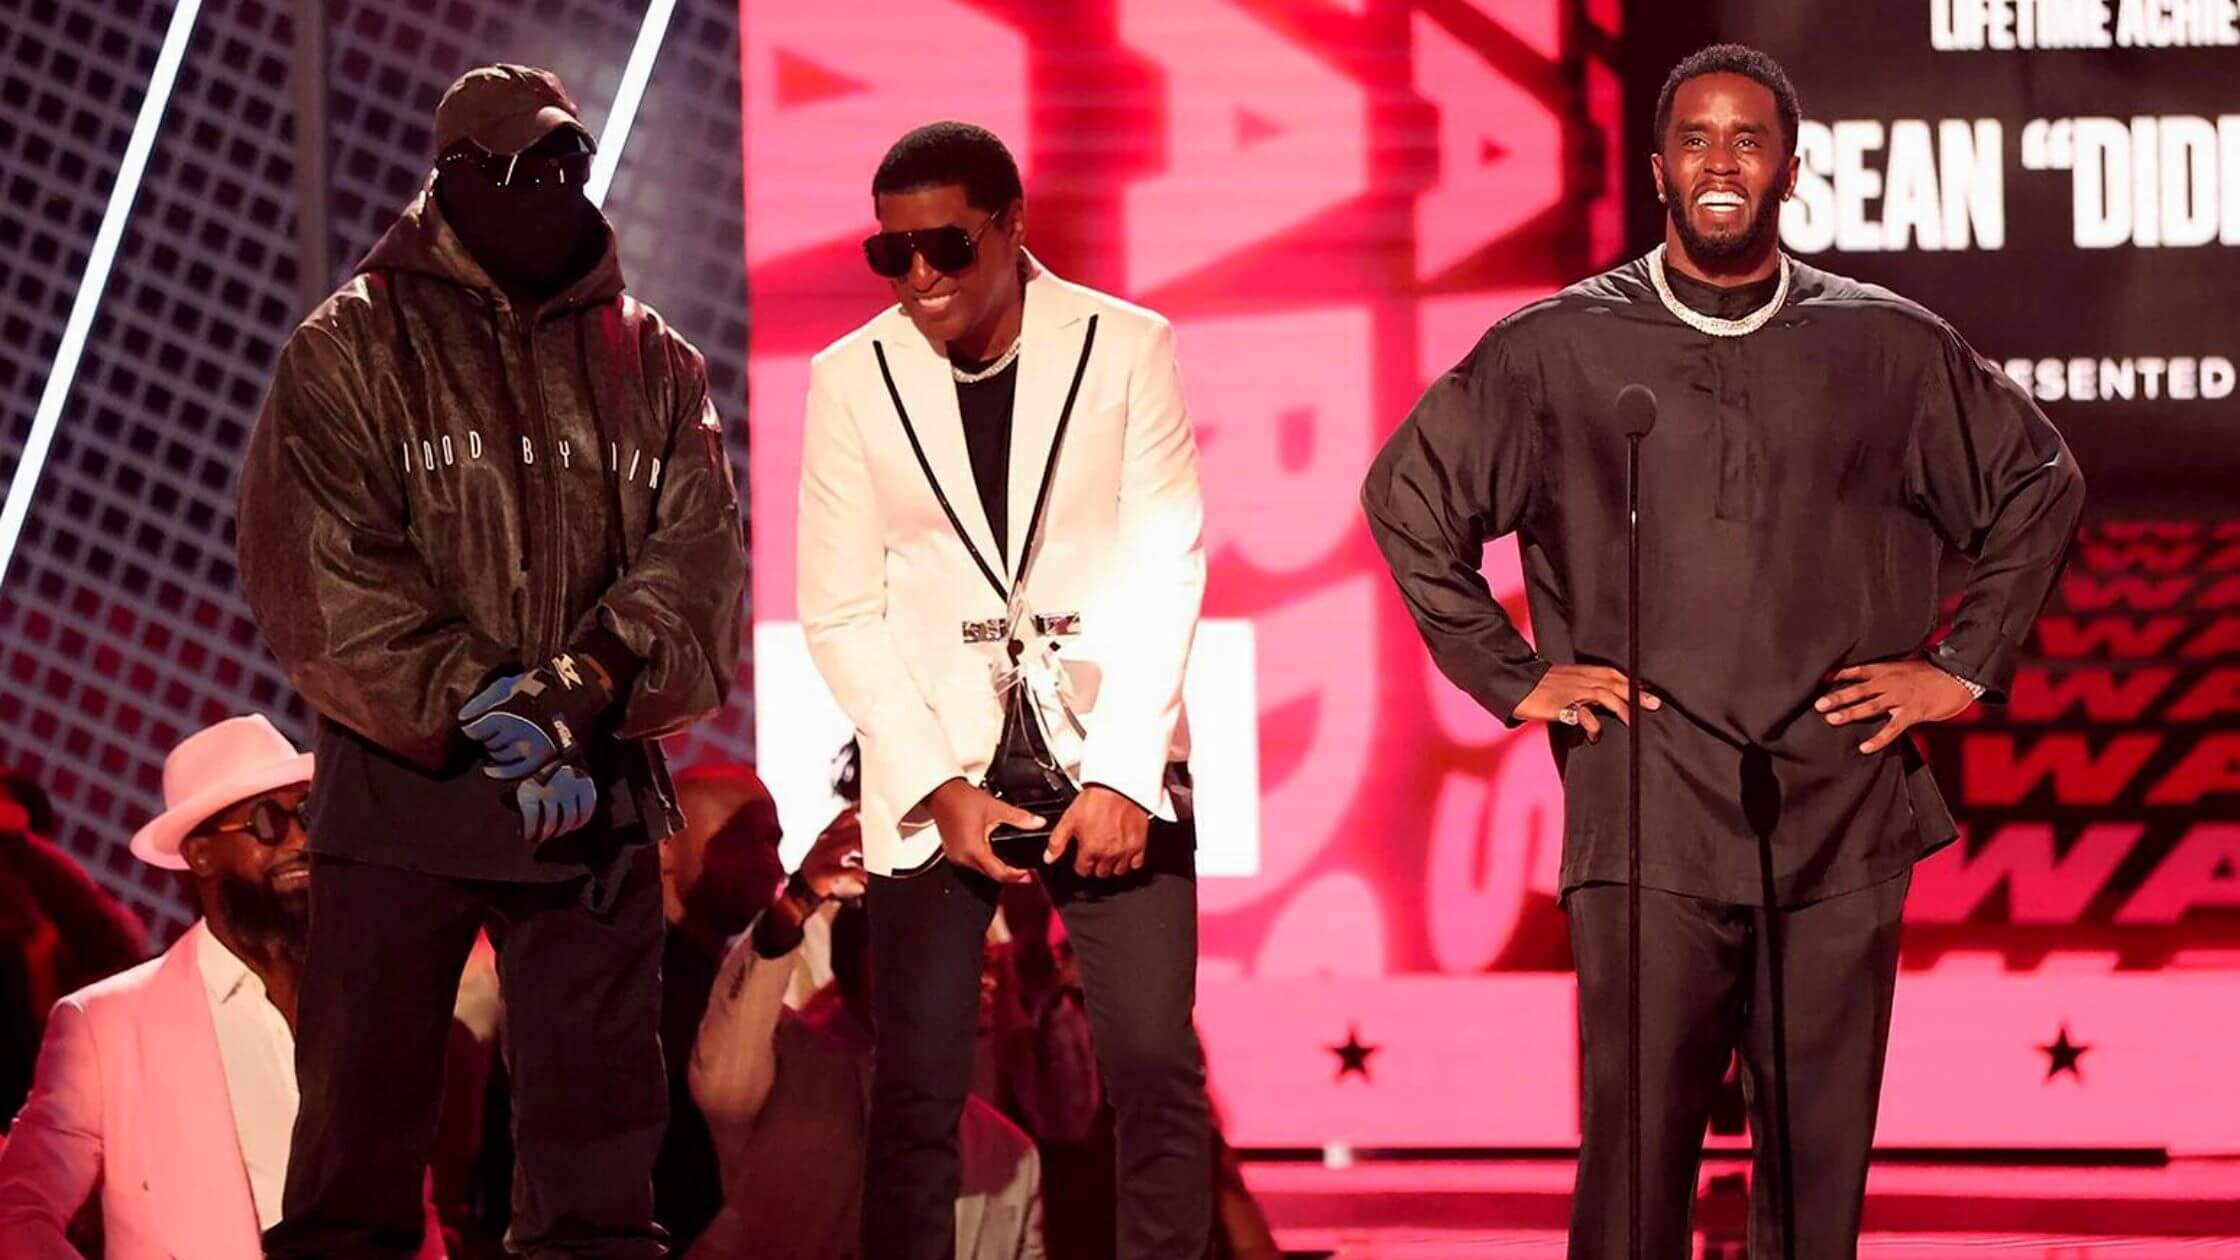 Kanye West Surprise Appearance To 'Diddy' Combs At BET Awards 2022